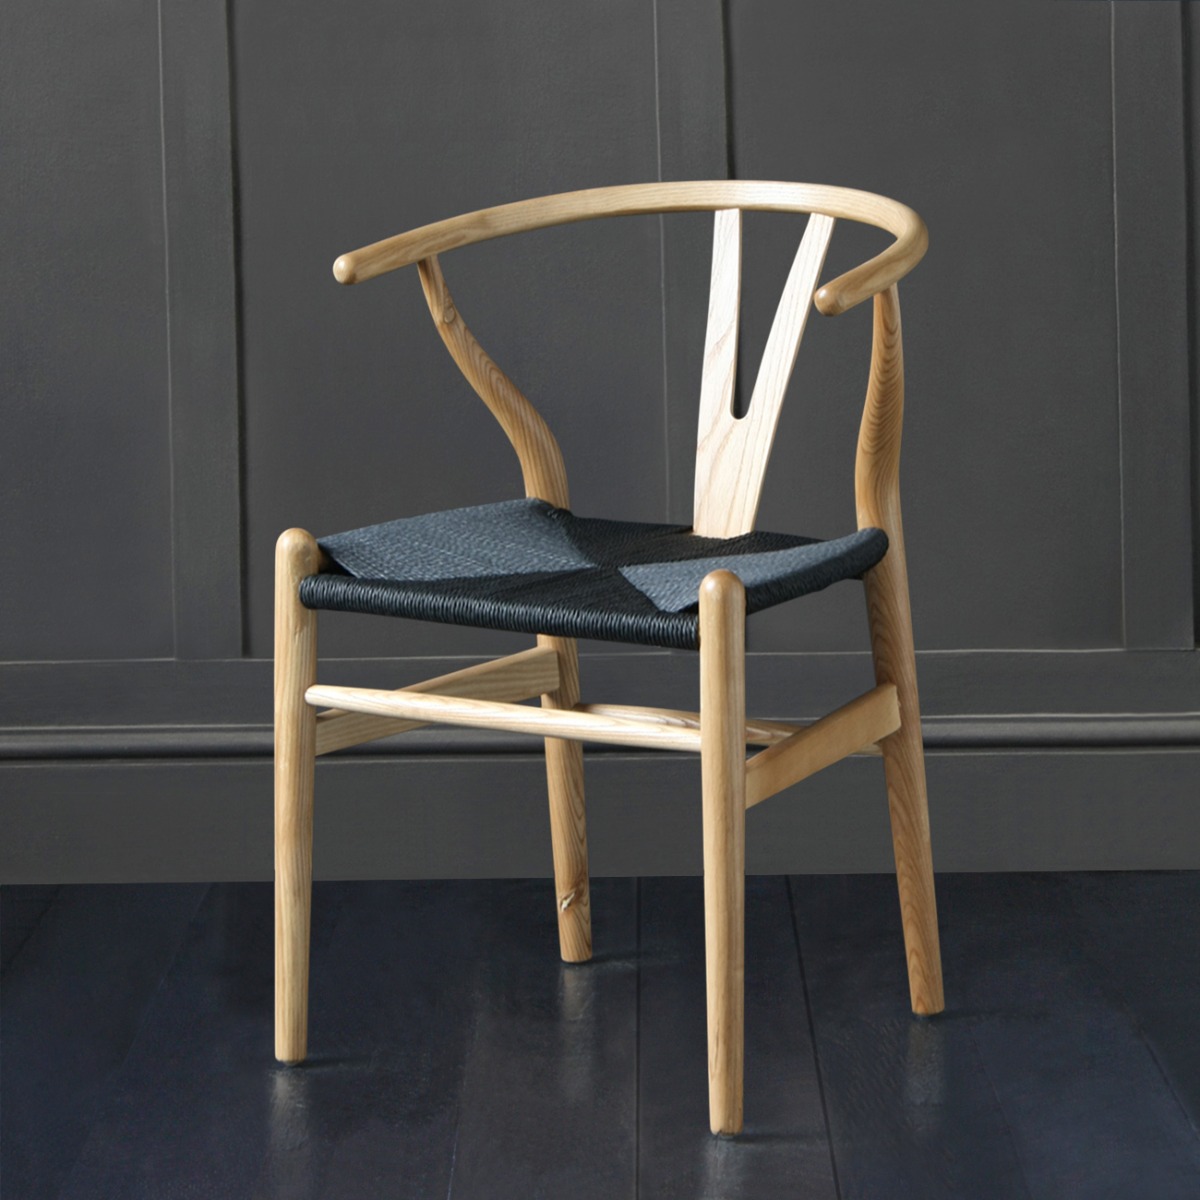 Our Wishbone Chairs are a real winner for home working!